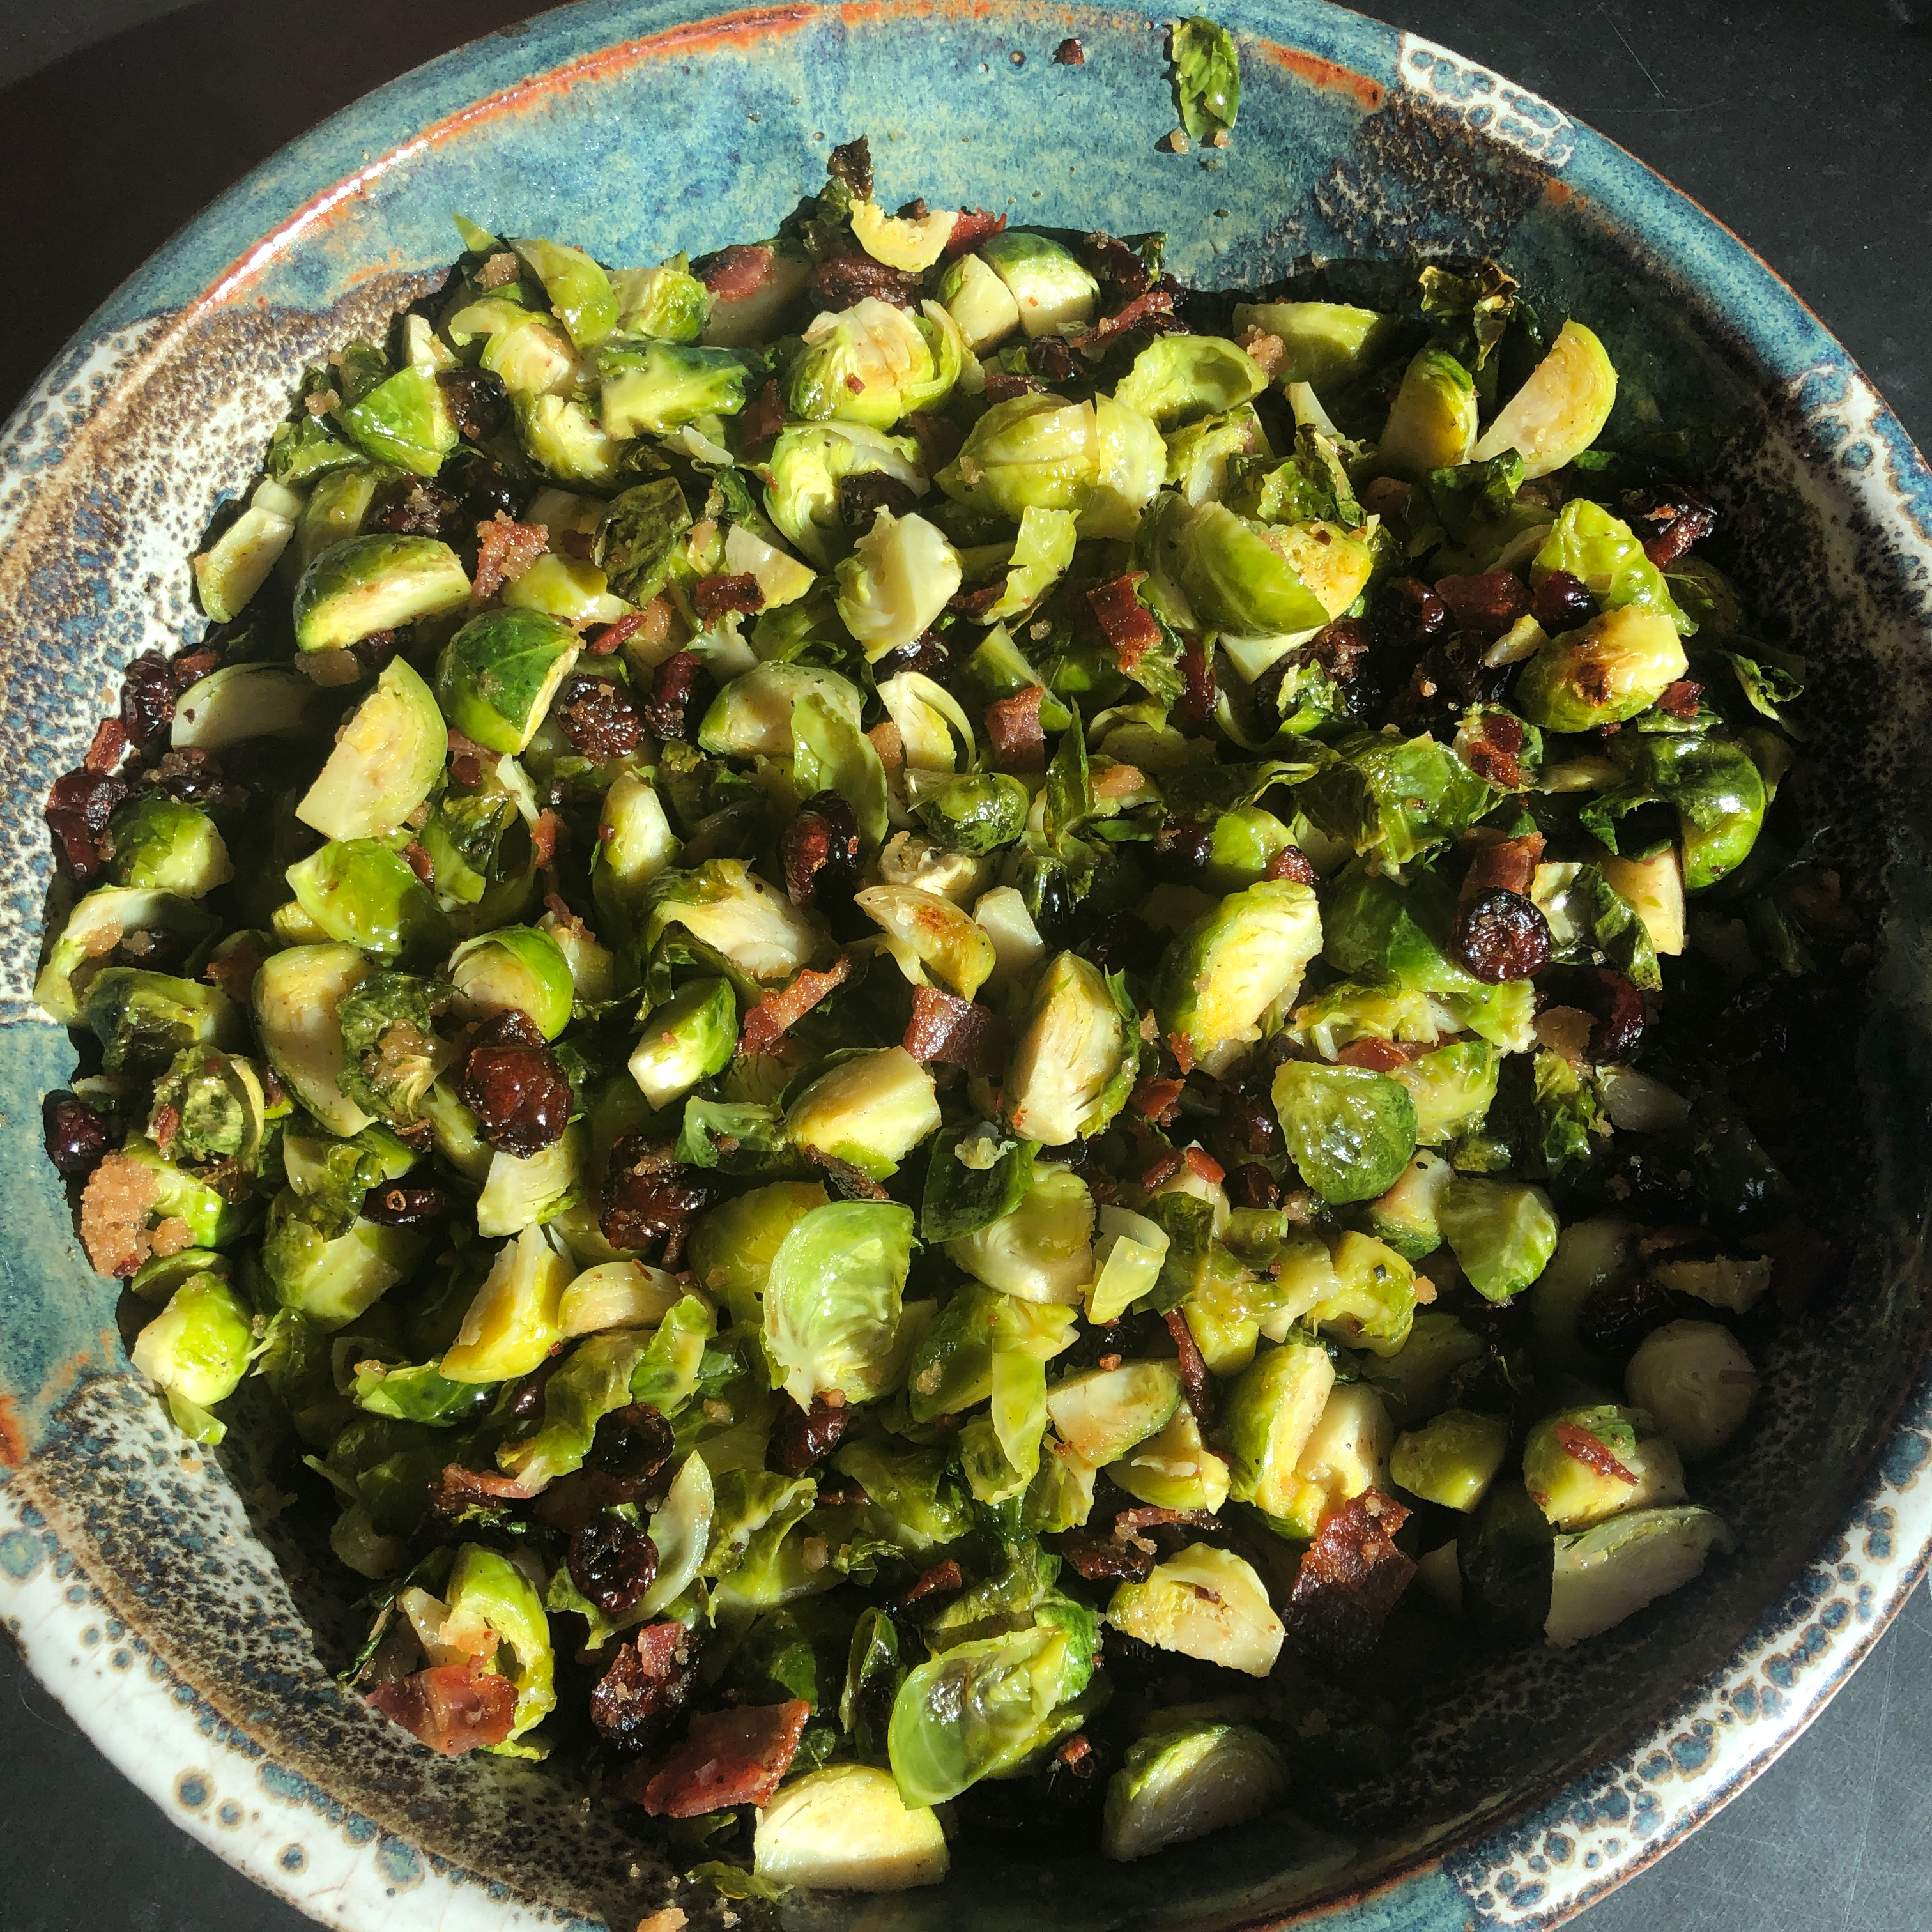 Roasted Brussels Sprouts with Cranberries